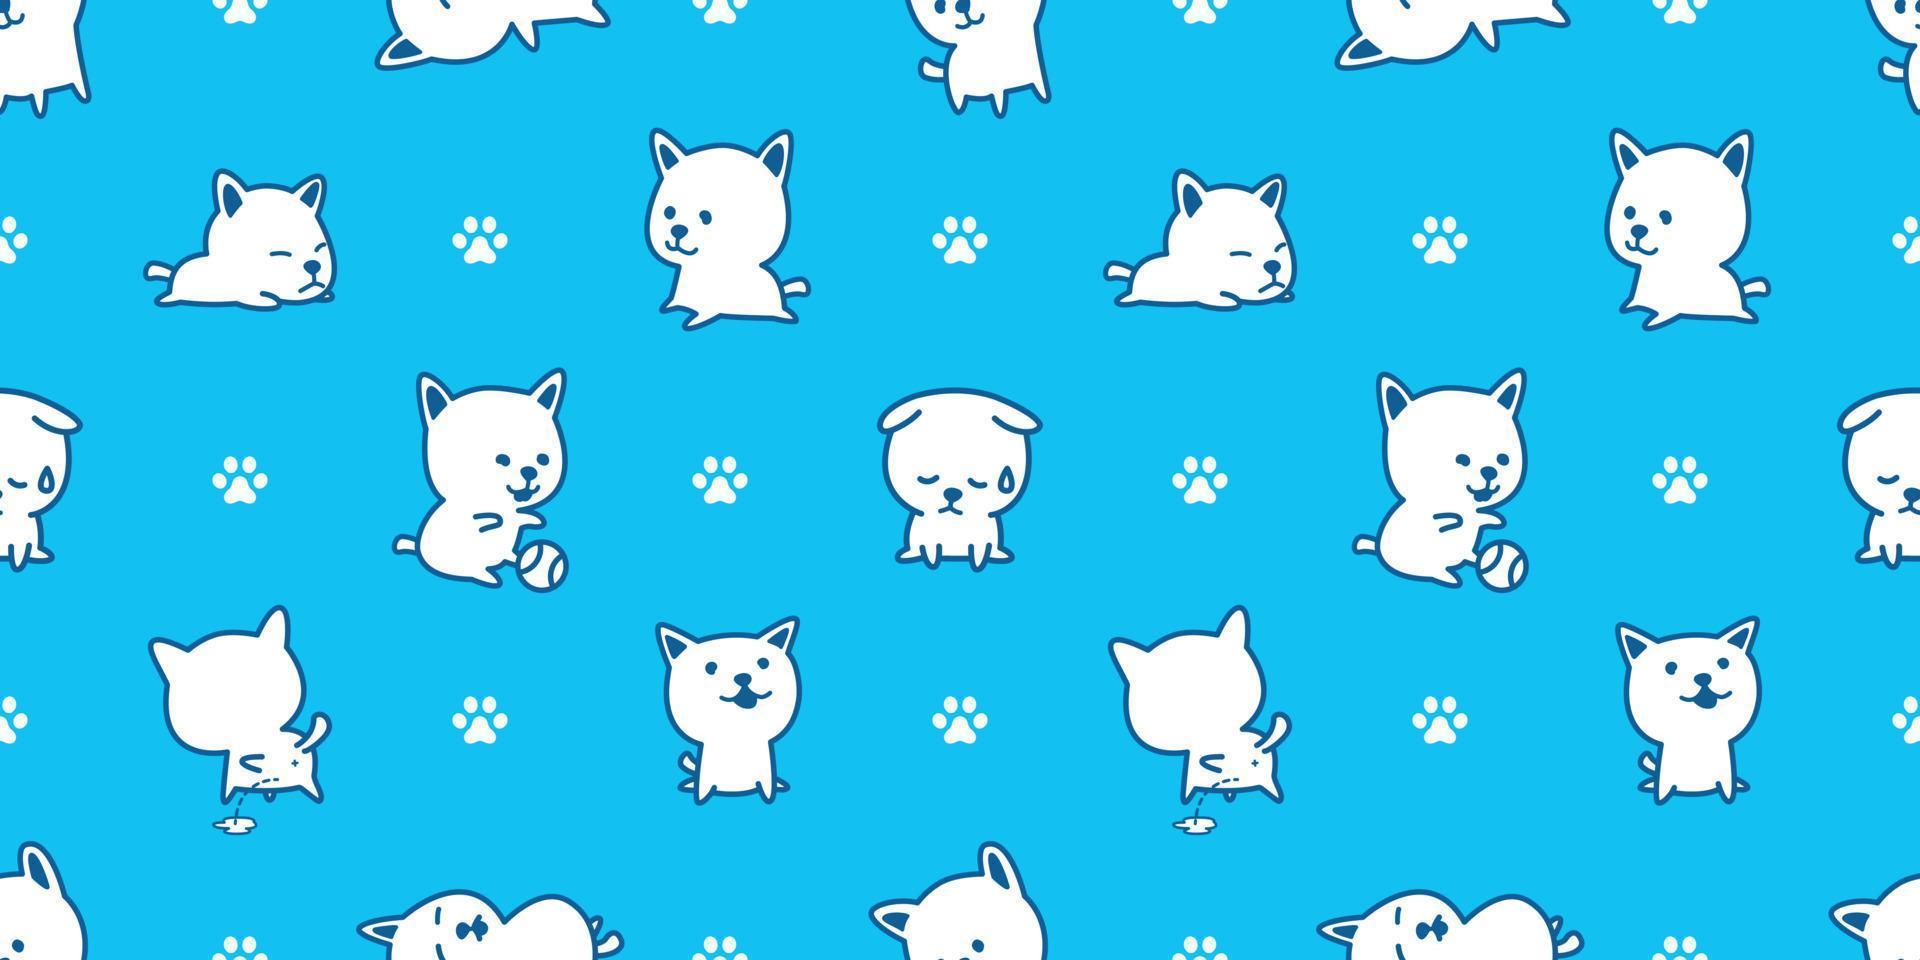 dog seamless pattern vector french bulldog breed puppy pug repeat background wallpaper doodle cartoon